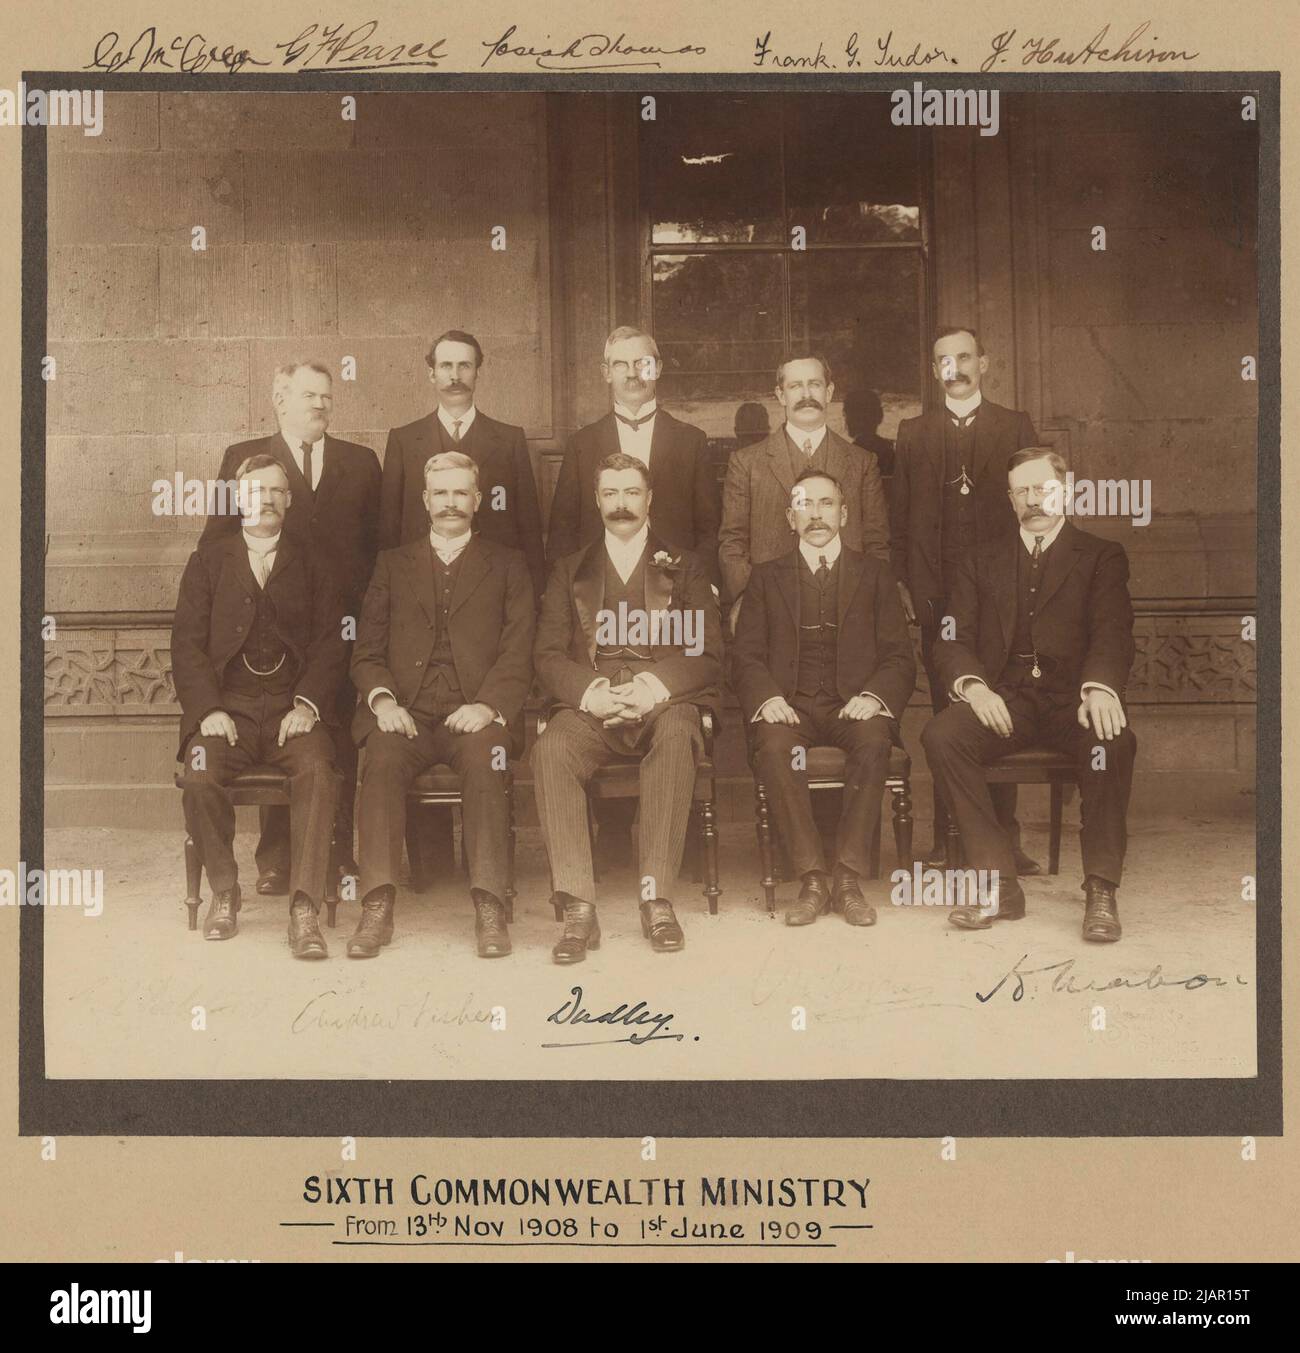 Members of the First Fisher Ministry, the Australian Labor Party government from 1908 to 1909 Back row (L-R): Gregor McGregor, Vice-President of the Executive CouncilGeorge Pearce, Minister for DefenceJosiah Thomas, Postmaster-GeneralFrank Tudor, Minister for Trade and CustomsJames Hutchison, Minister without portfolioFront row (L-R): Lee Batchelor, Minister for External AffairsAndrew Fisher, Prime Minister and TreasurerThe Earl of Dudley, Governor-GeneralBilly Hughes, Attorney-GeneralHugh Mahon, Minister for Home Affairs ca.  between 1908 and 1909 Stock Photo